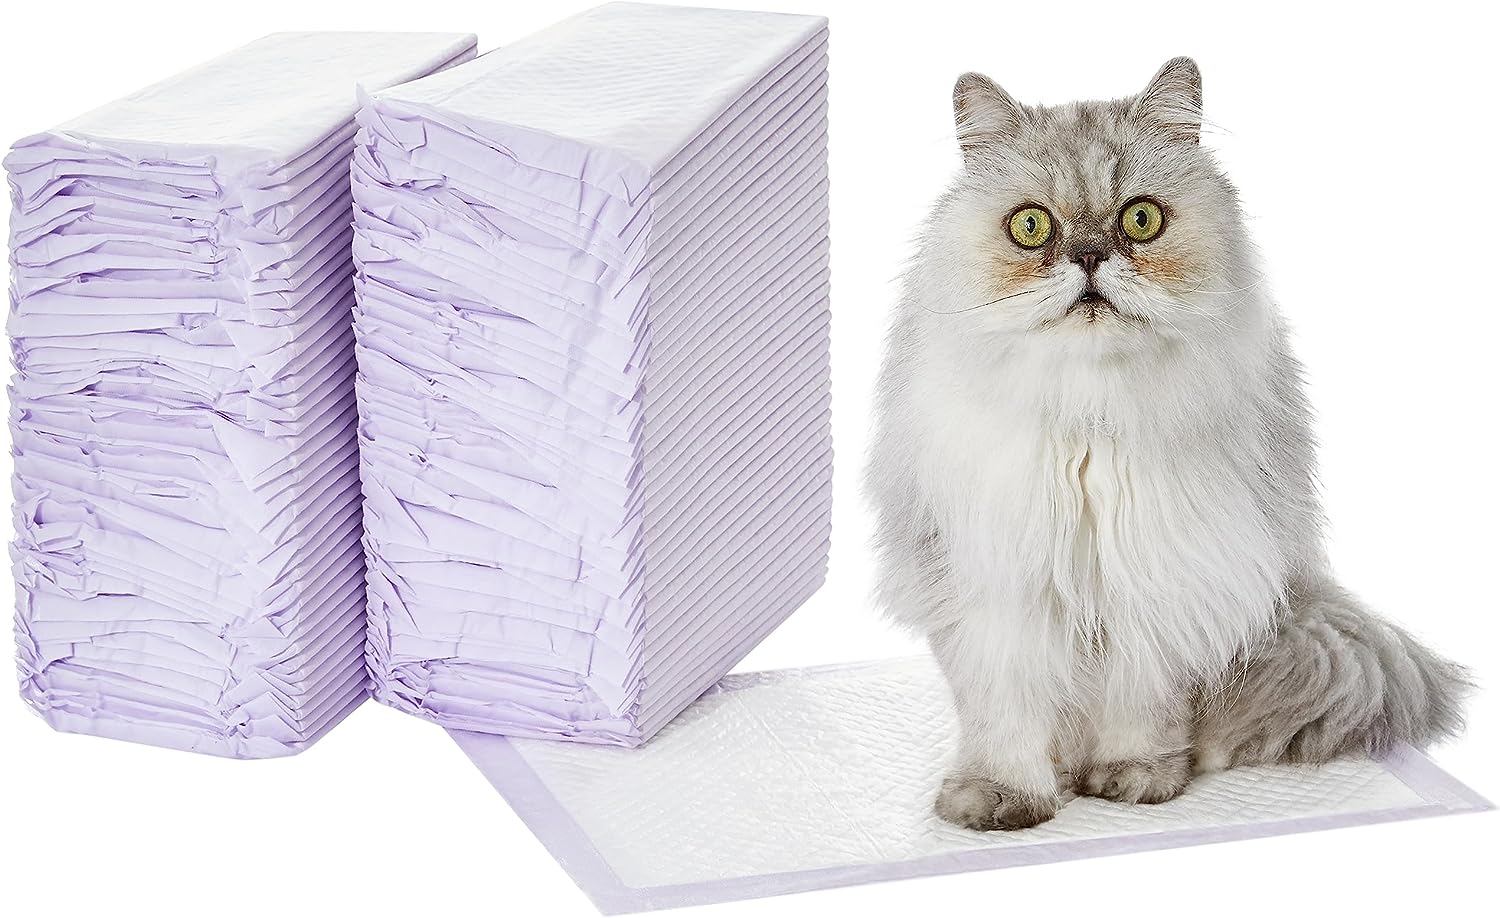 Amazon Basics Cat Pad Refills for Litter Box, Unscented, Pack of 80, Purple $14.26